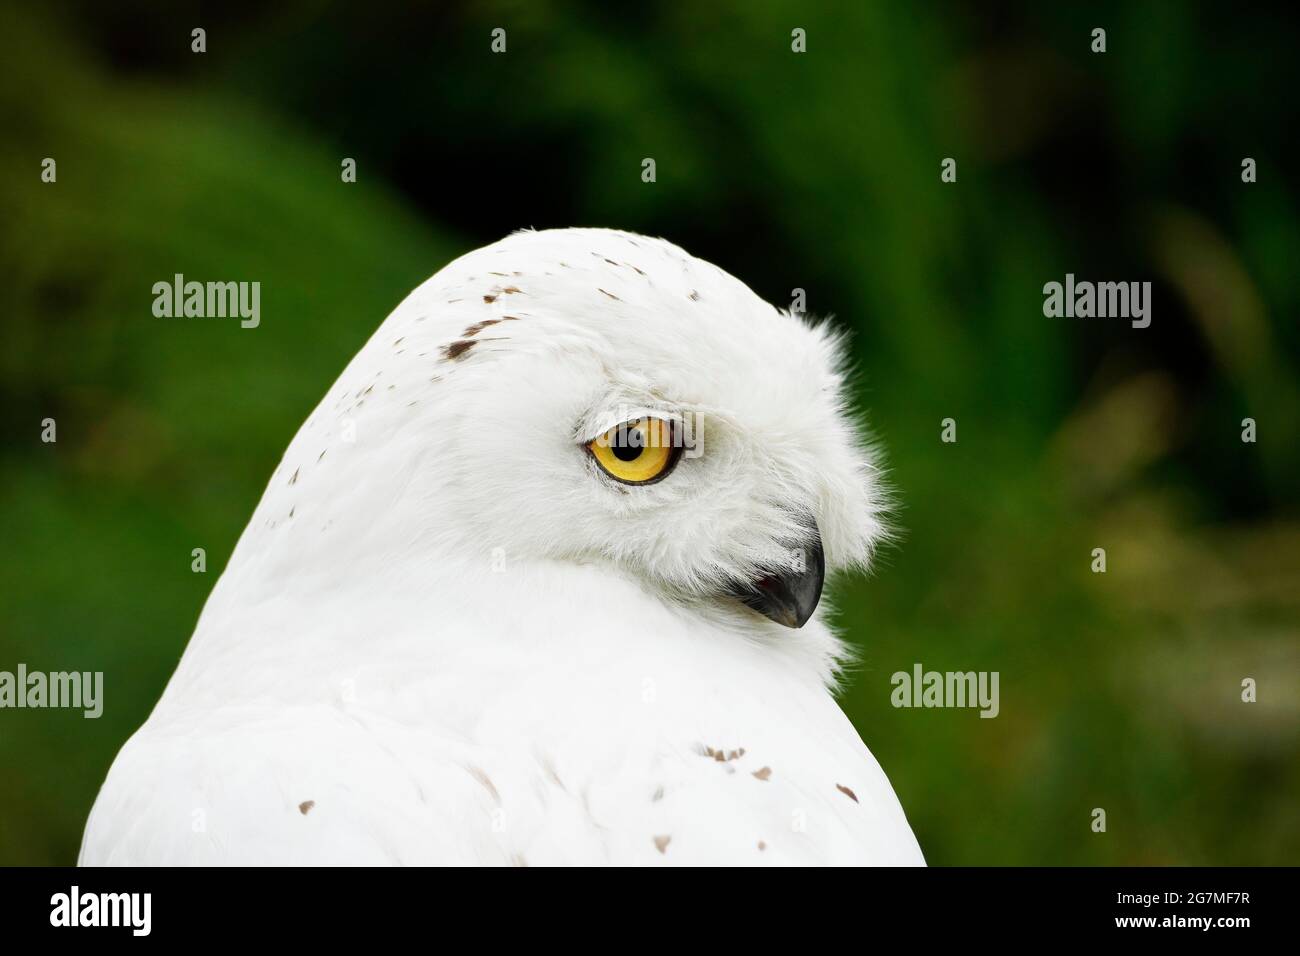 Portrait of a snow owl with a green background. Bubo scandiacus. Bird with white plumage and yellow eyes. Stock Photo